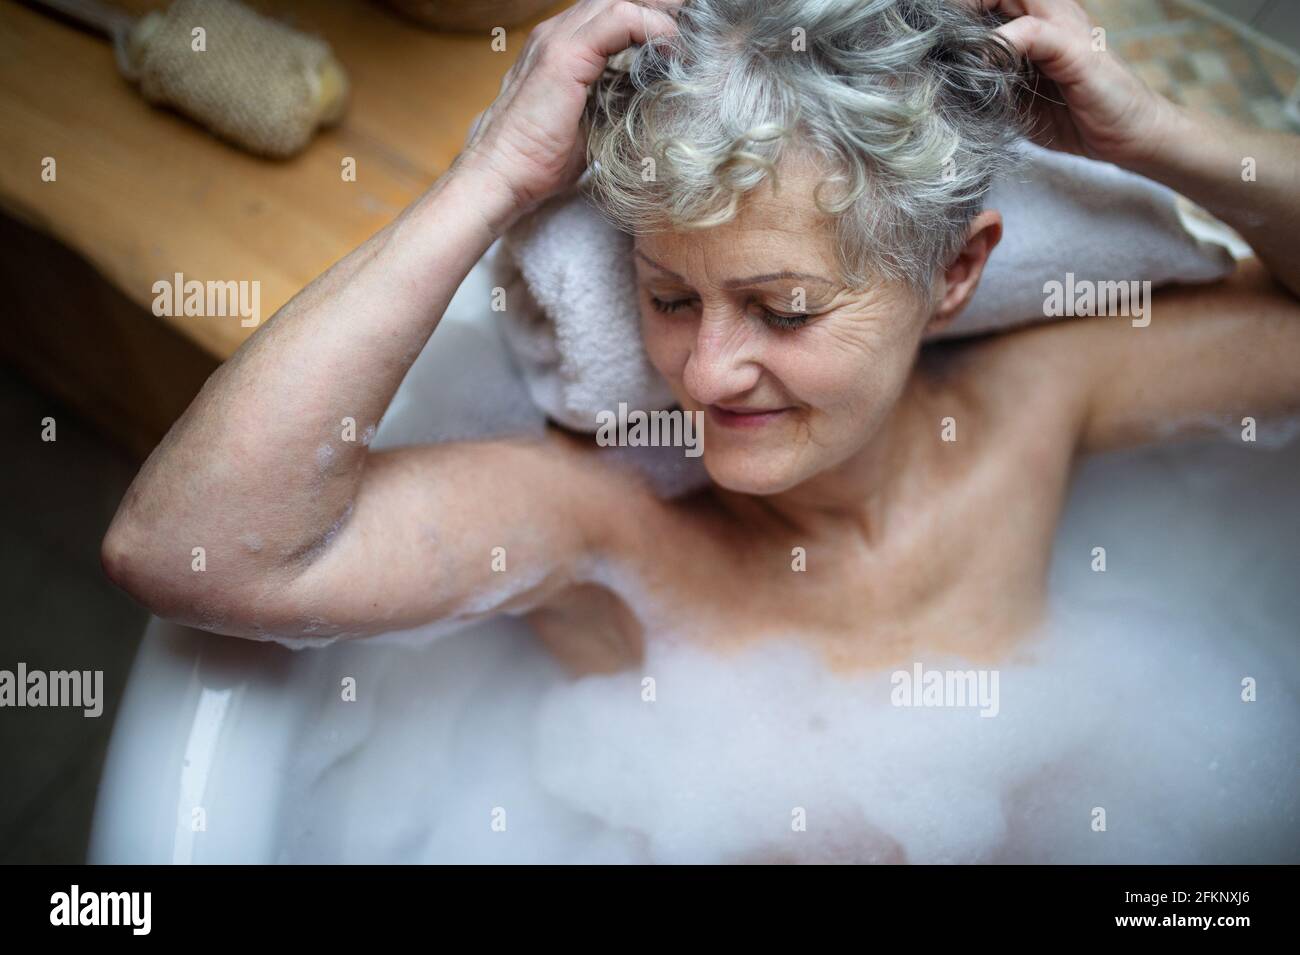 Top view of contented senior woman lying in bath tub at home, eyes closed. Stock Photo